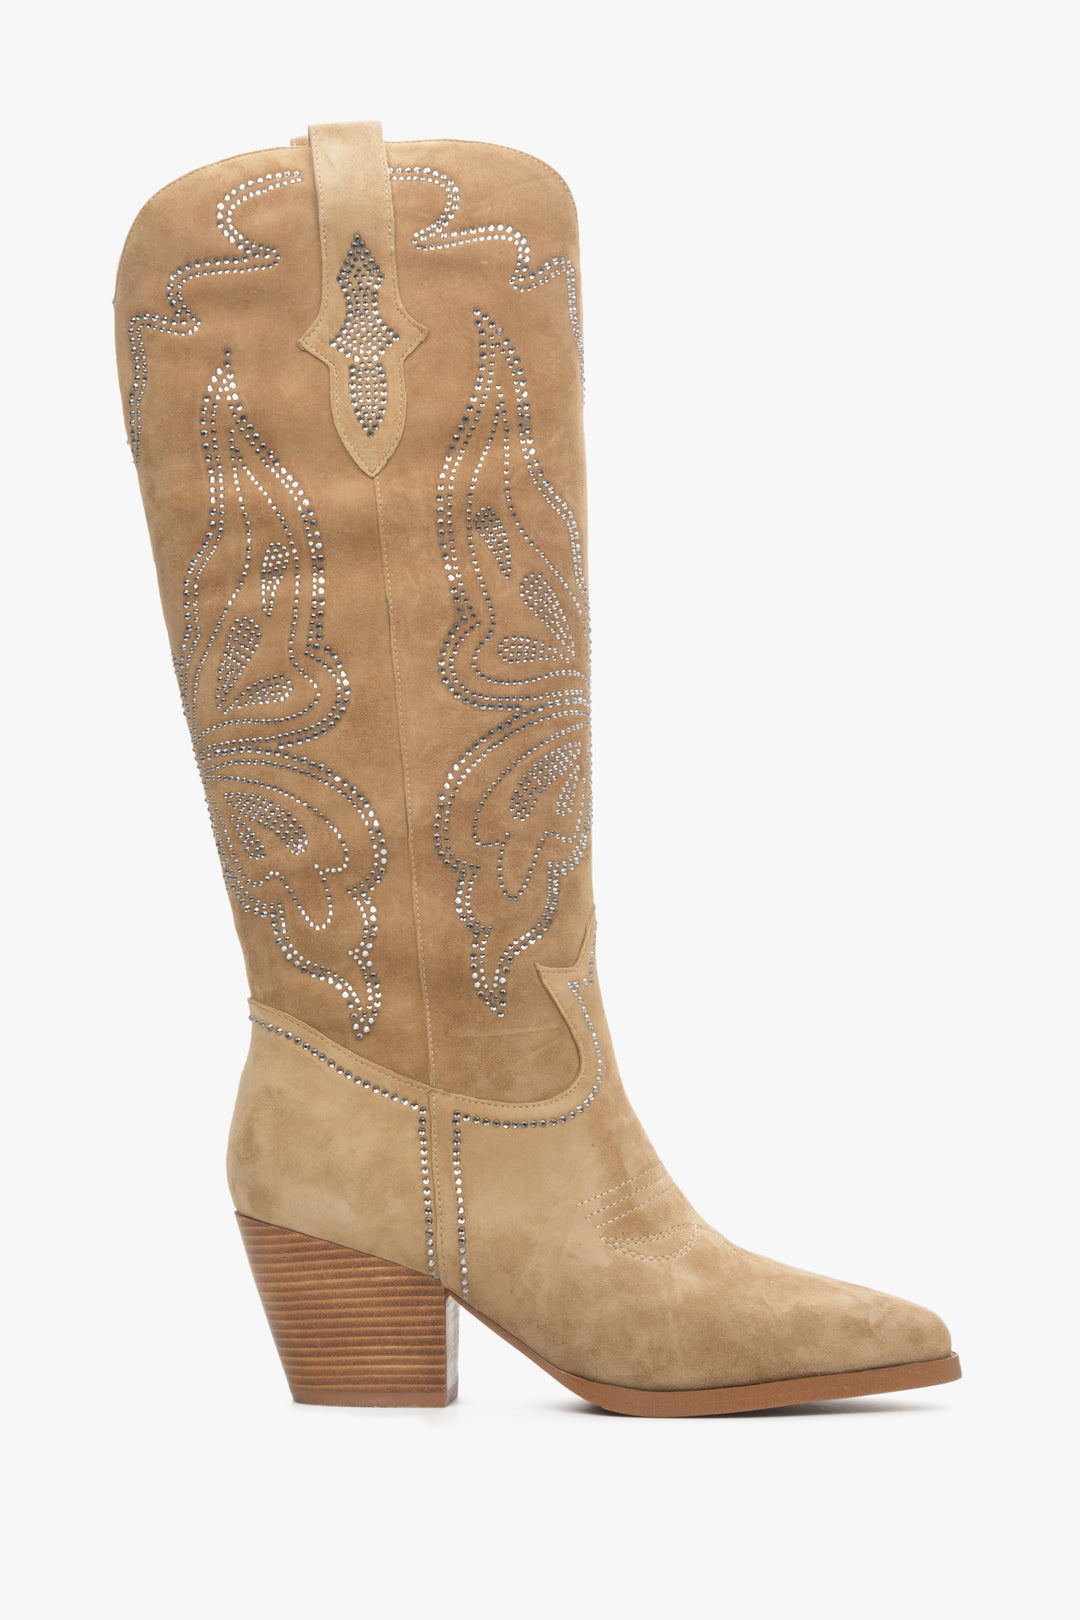 Velour women's cowboy boots with a high upper in beige by Estro - shoe profile.